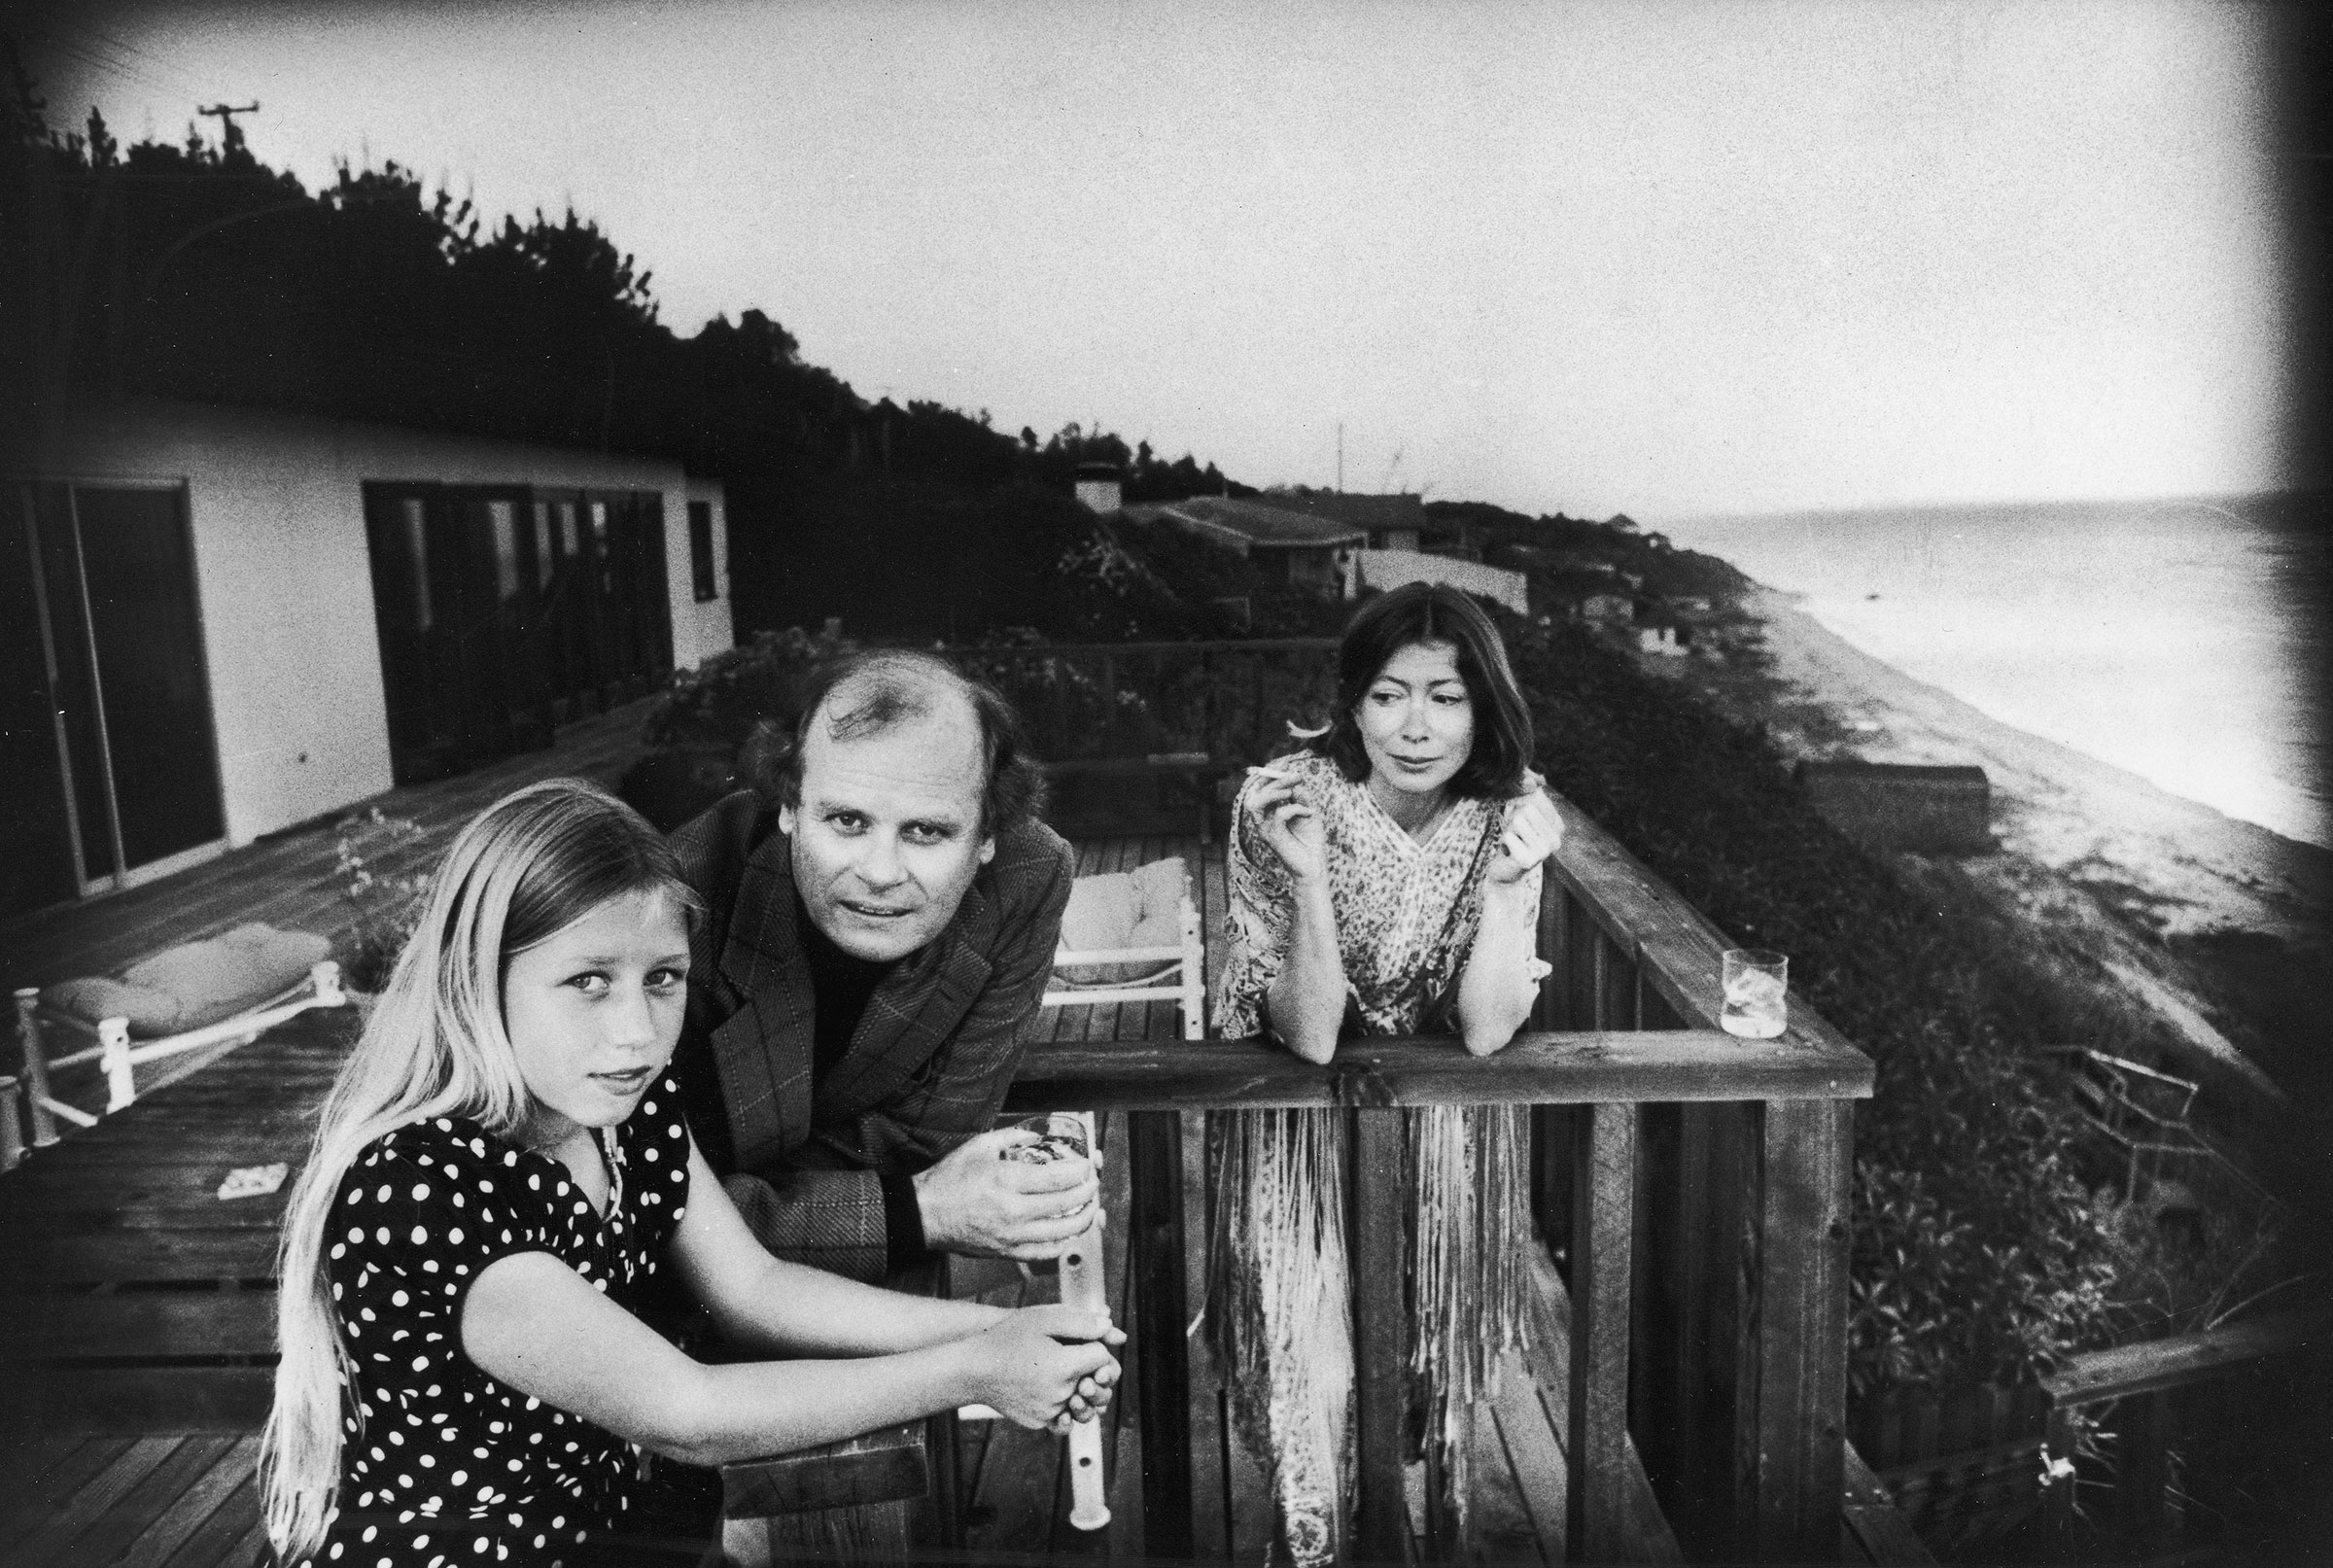 On a patio deck overlooking the ocean, Quintana Roo Dunne leans on a railing with her parents, writers John Gregory Dunne and Joan Didion, in Malibu, Calif., 1976. (John Bryson—Getty Images)